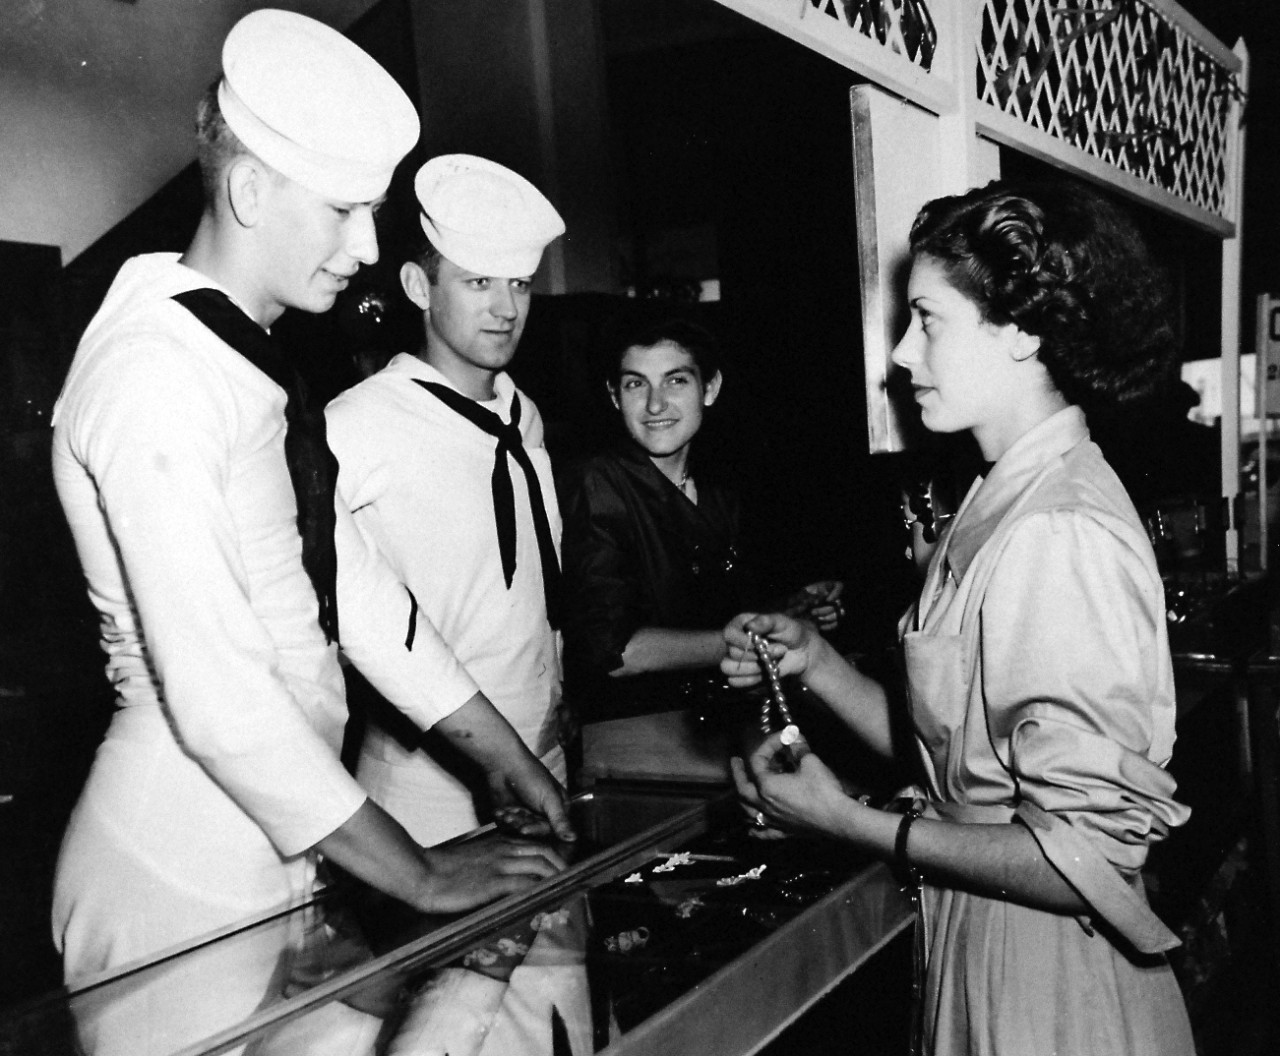 80-G-416221:  USS Leyte (CV-32), June 1950.   sailors from the carrier escort on liberty in Cagliari, Sardinia, June 1950. Shown:  SH2 L.E. Lepage, (left) and AFAN P.B. Dickson, buying souvenirs.    Official U.S. Navy Photograph, now in the collections of the National Archives.  (2016/10/18).  